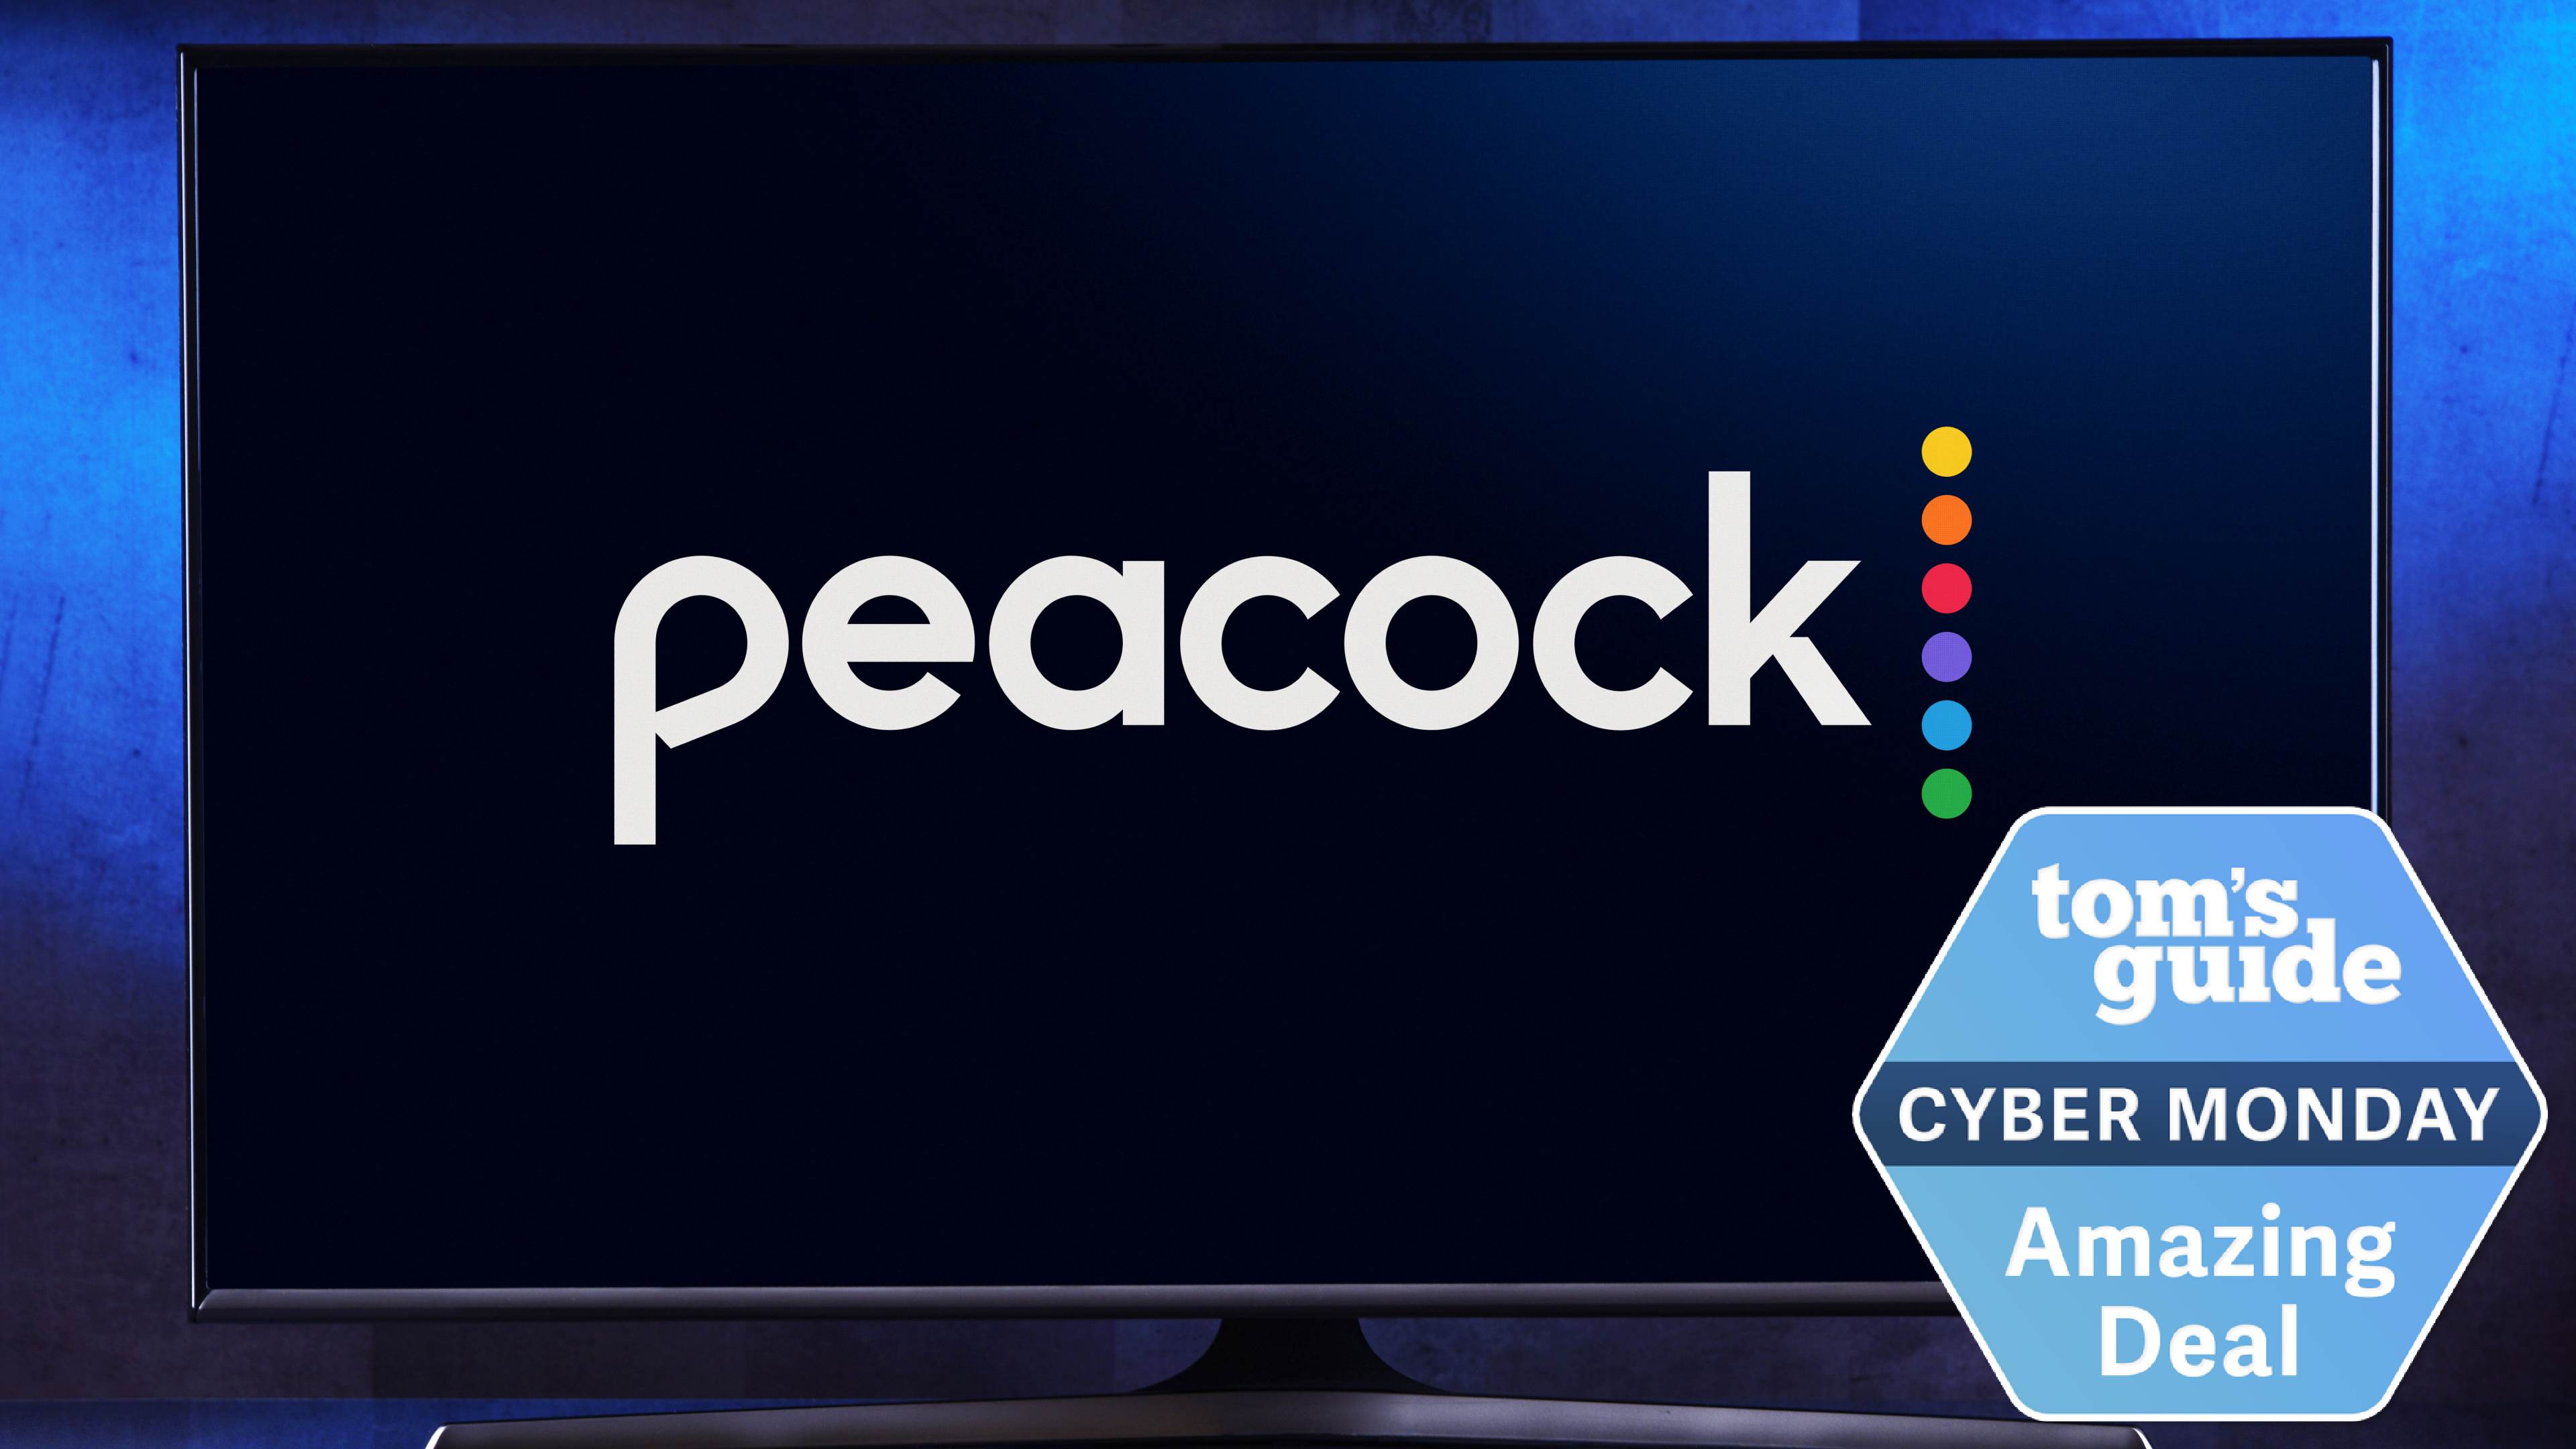 Peacock Cyber Monday deal: $1.99 a month for a full year of SYFY and more